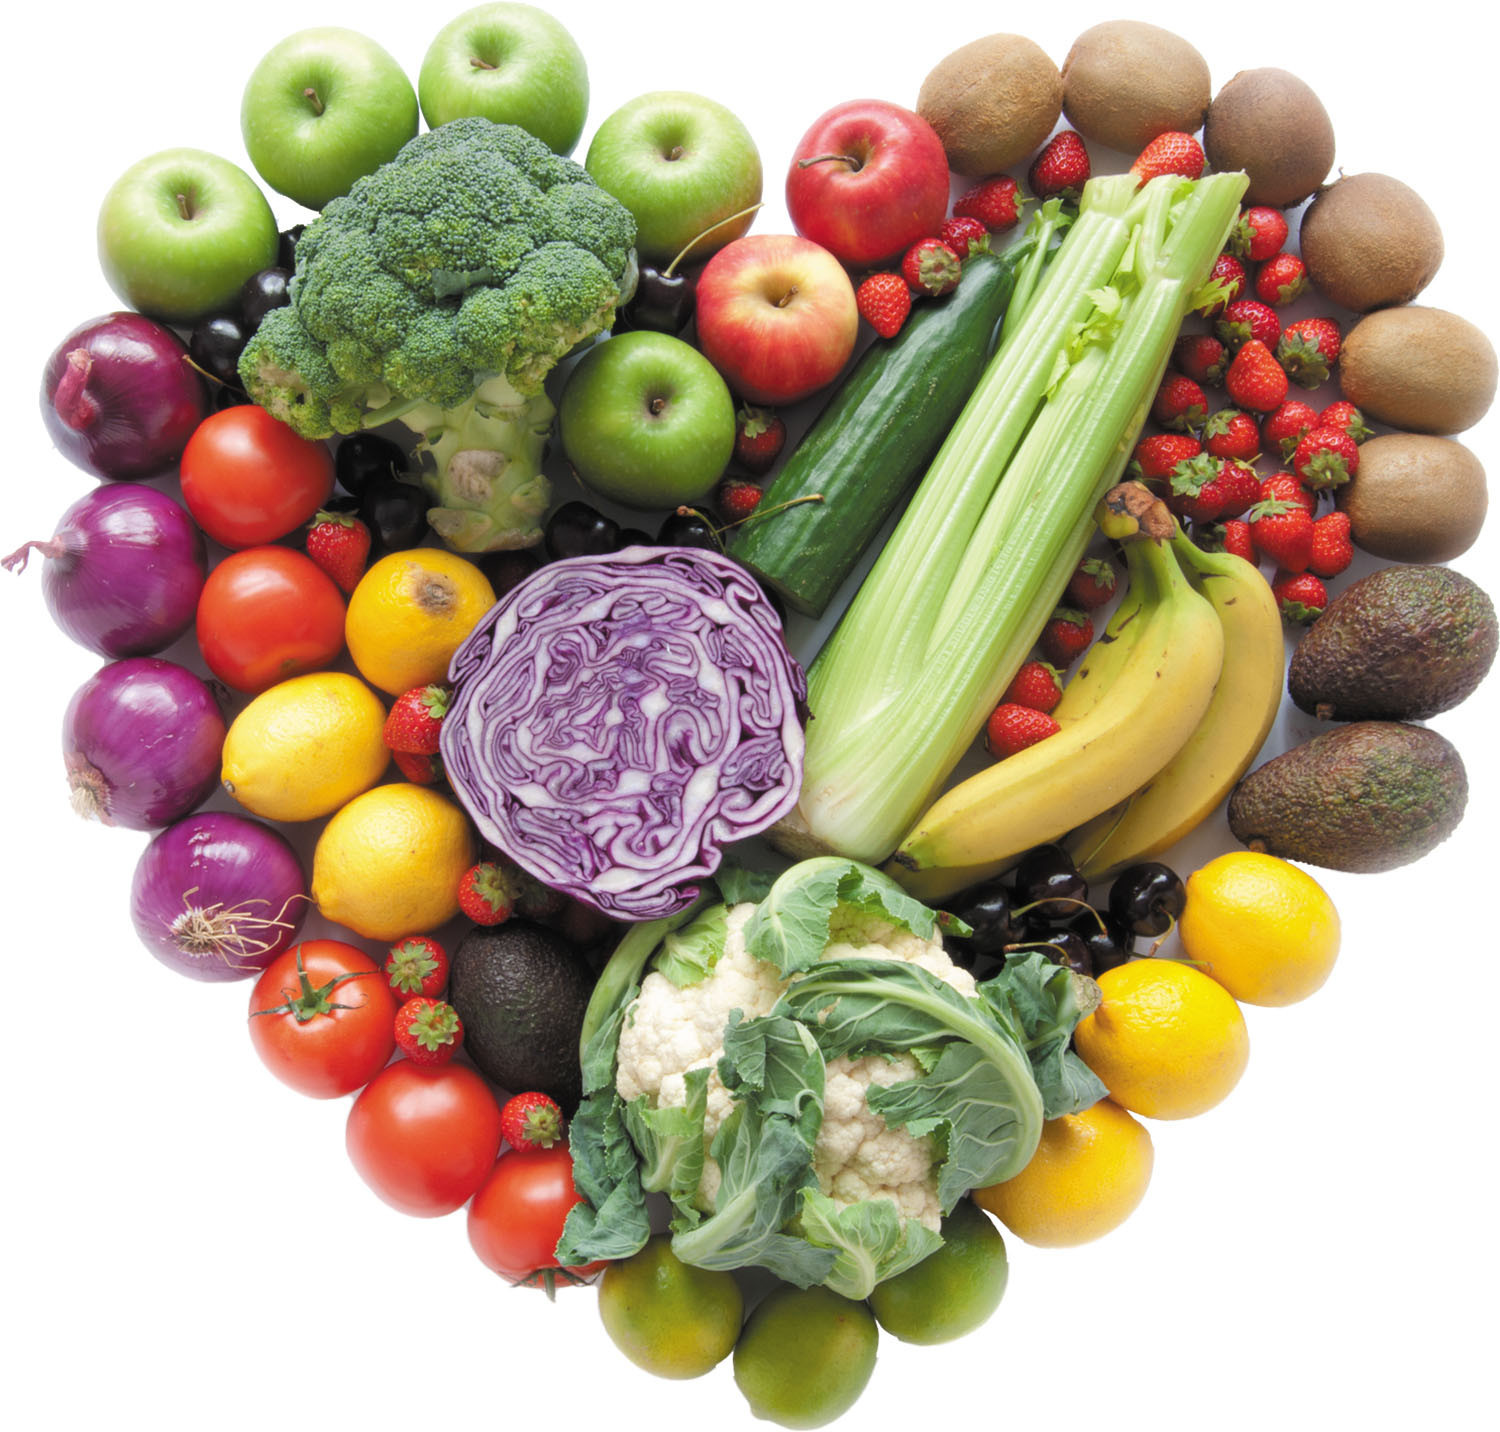 assortment of vegetables arranged in the shape of a heart